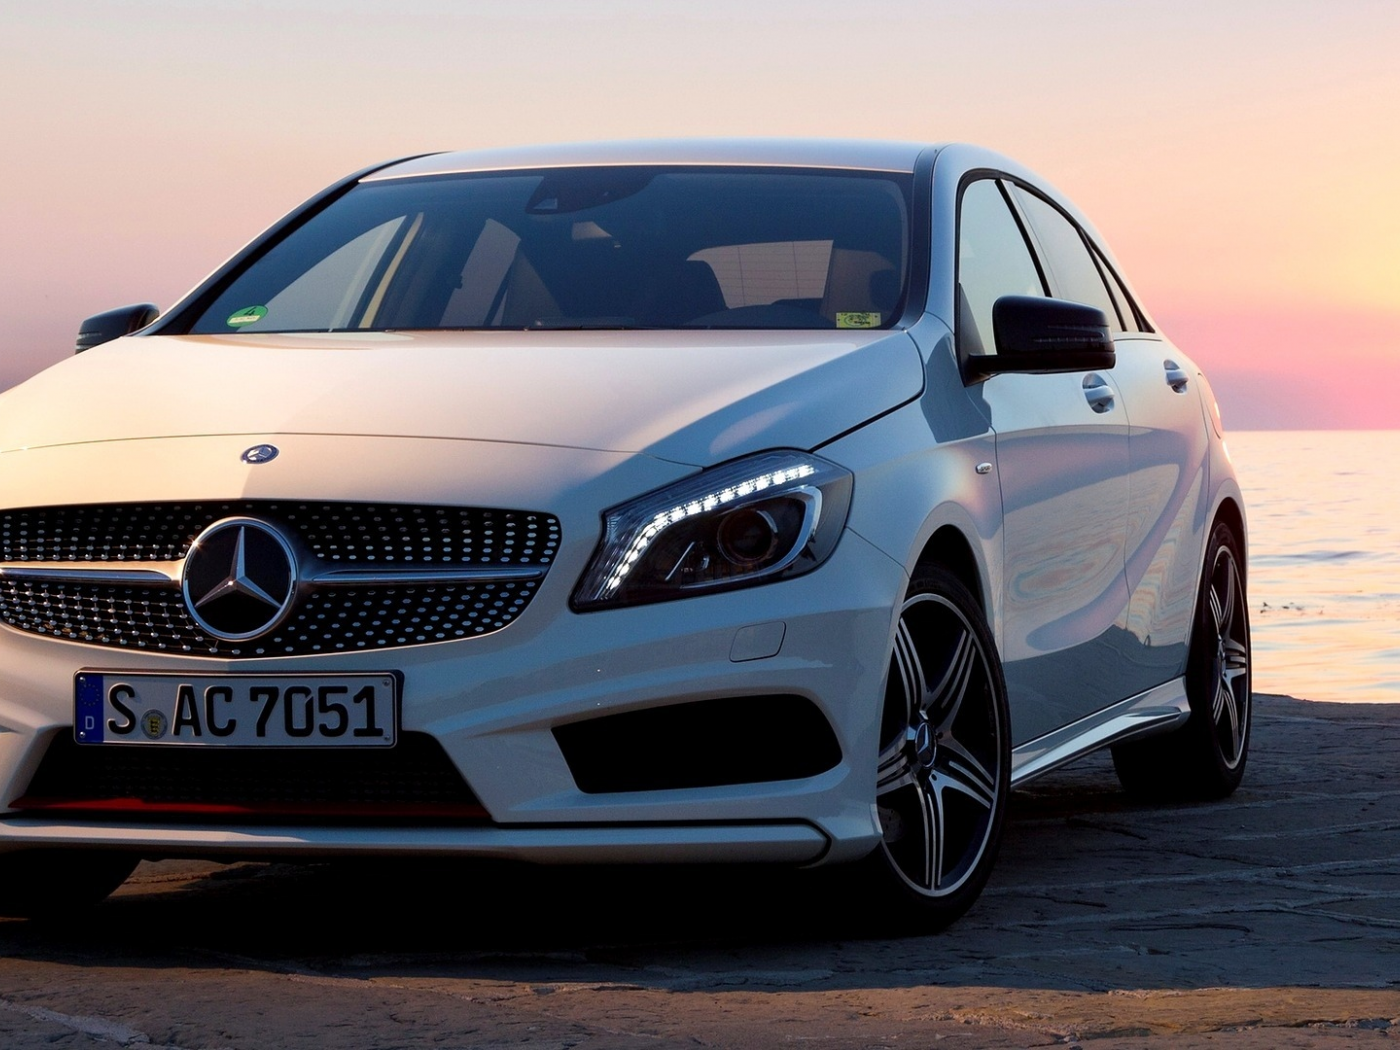 sport, a200, amg, 2012, wallpapers, Car, автомобиль, new, mercedes, package, white